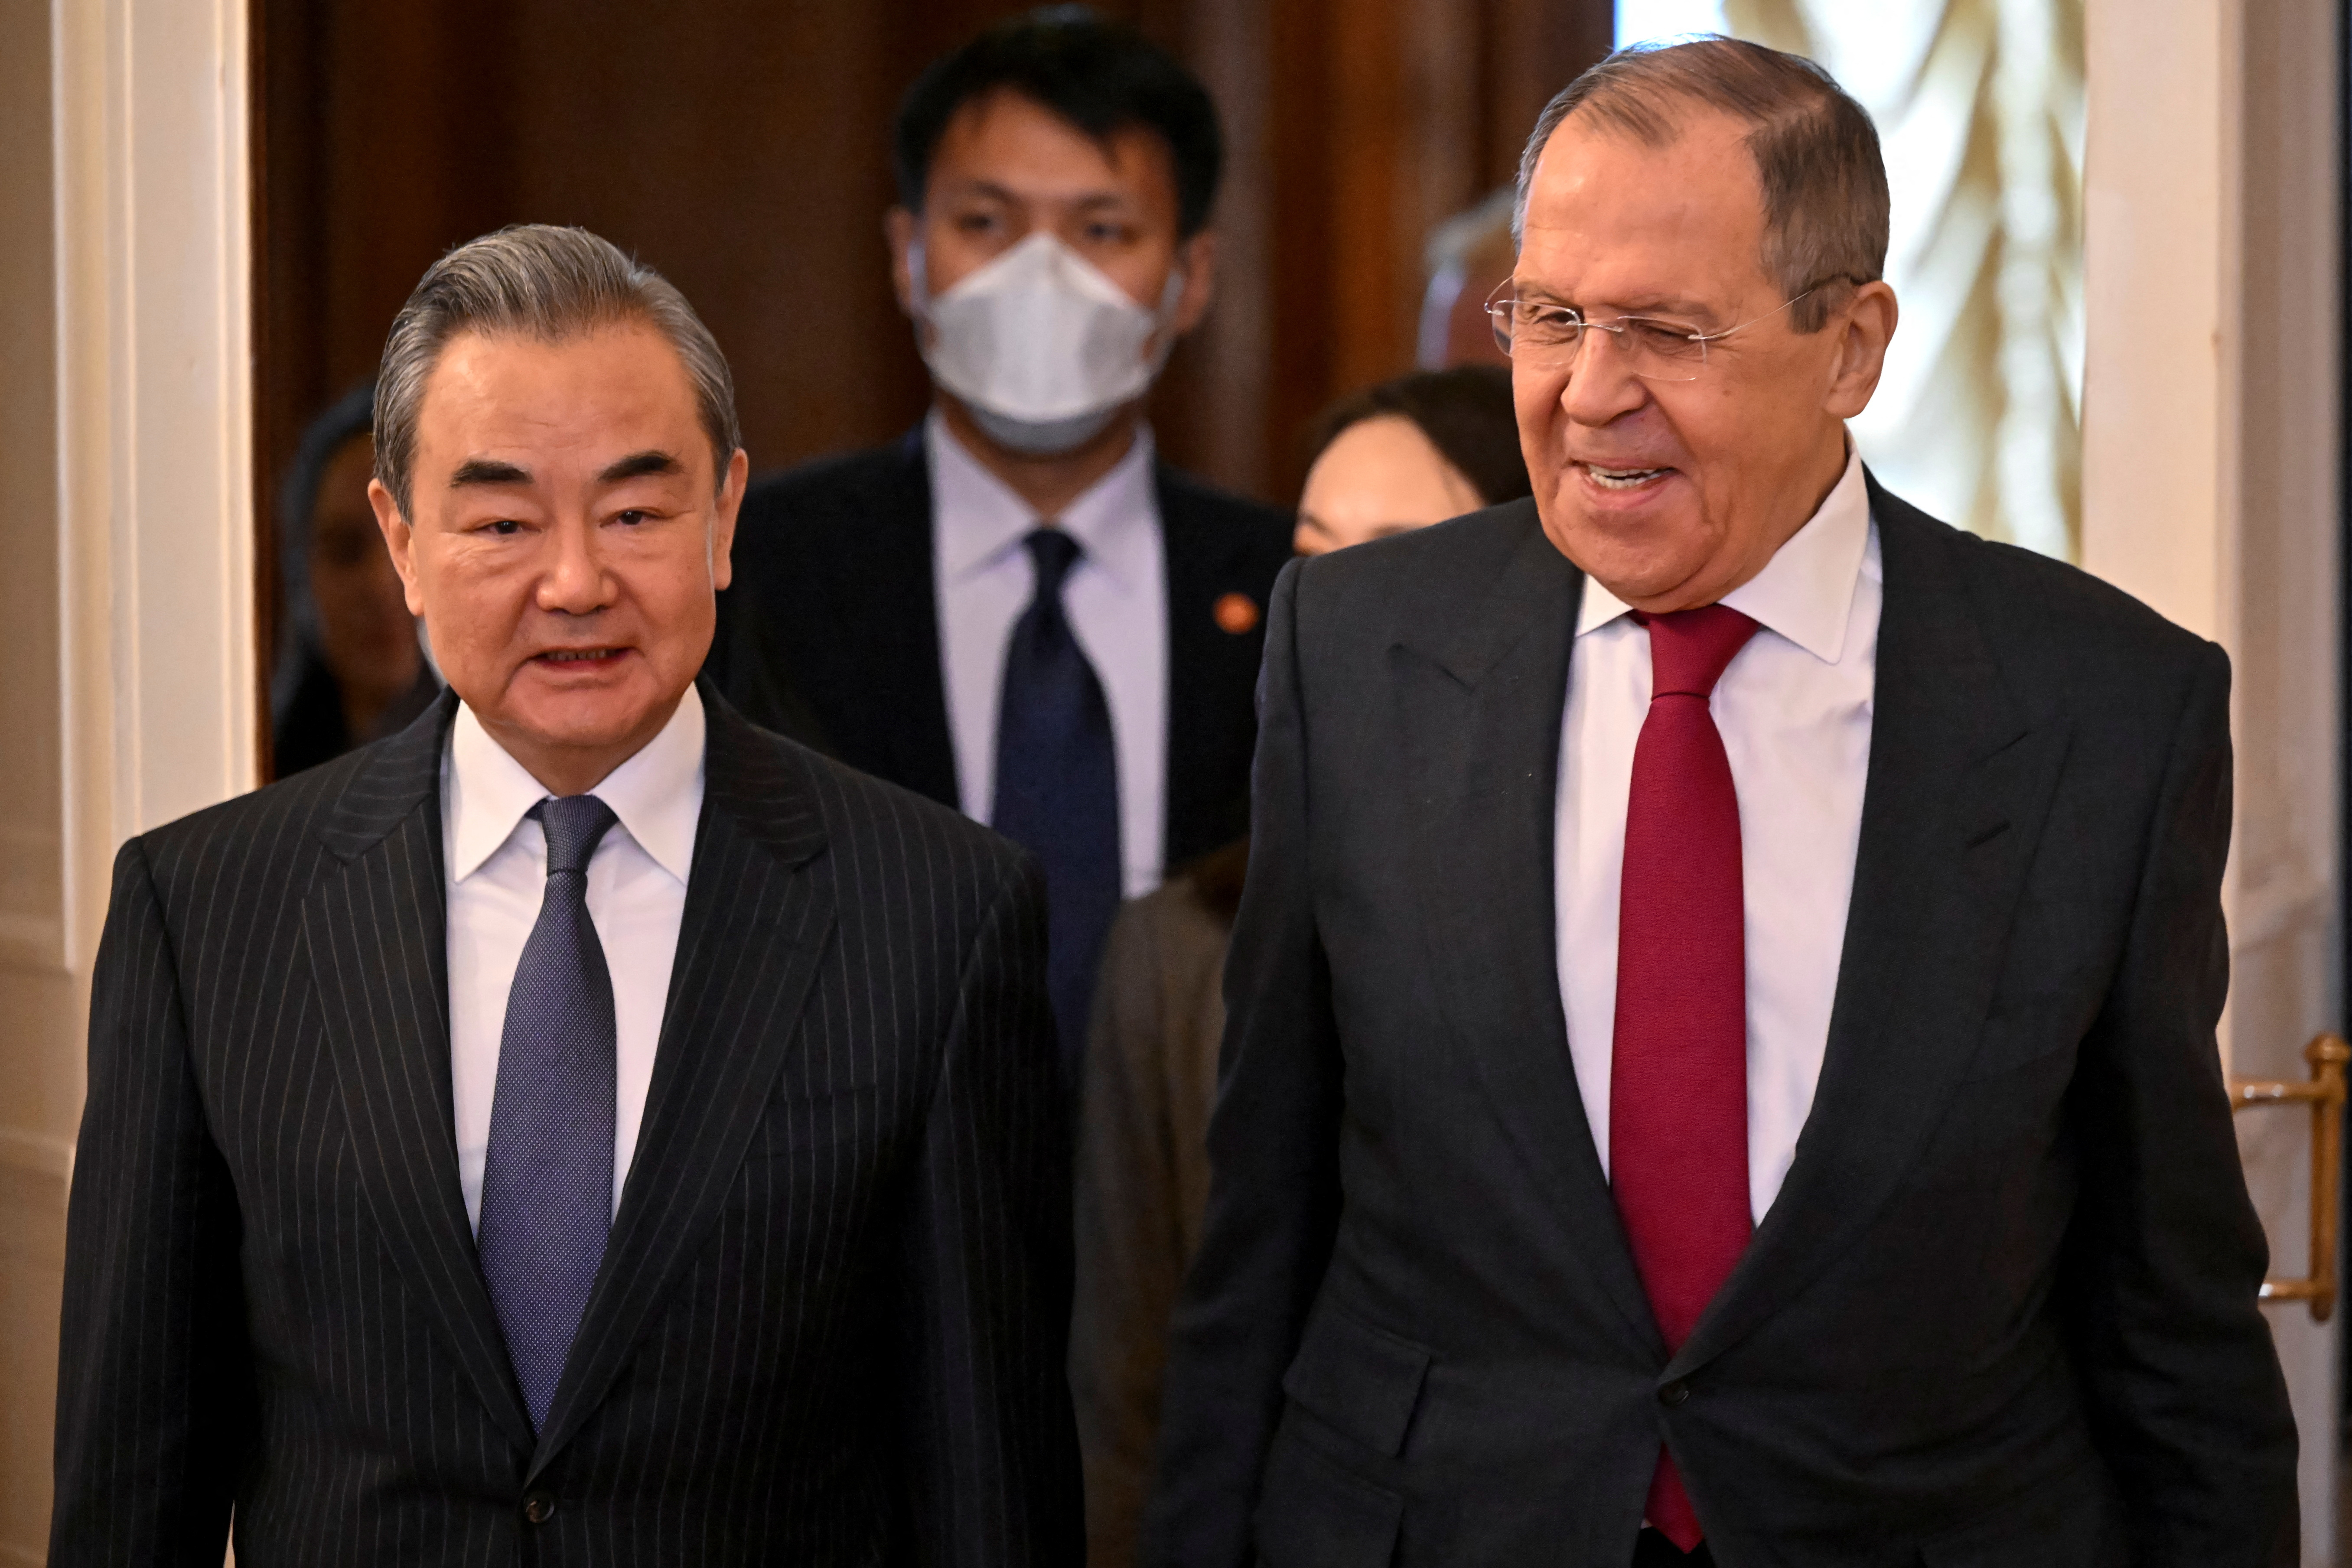 Russia's Foreign Minister Sergei Lavrov meets with China's top diplomat Wang Yi in Moscow